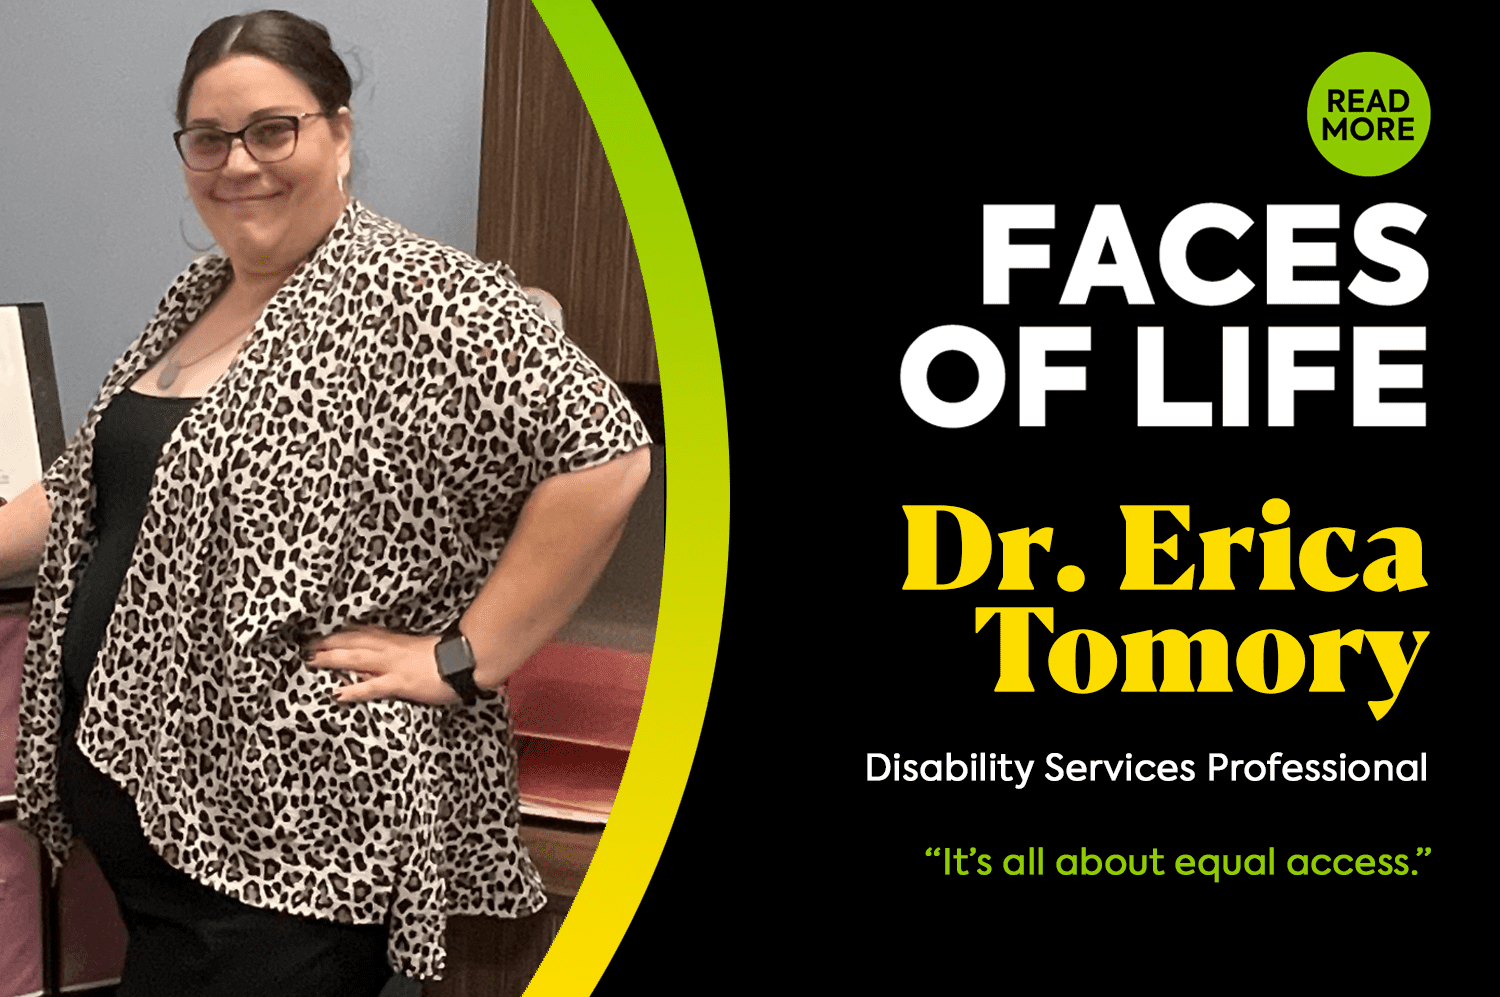 Faces of LIFE- Dr. Erica Tomory